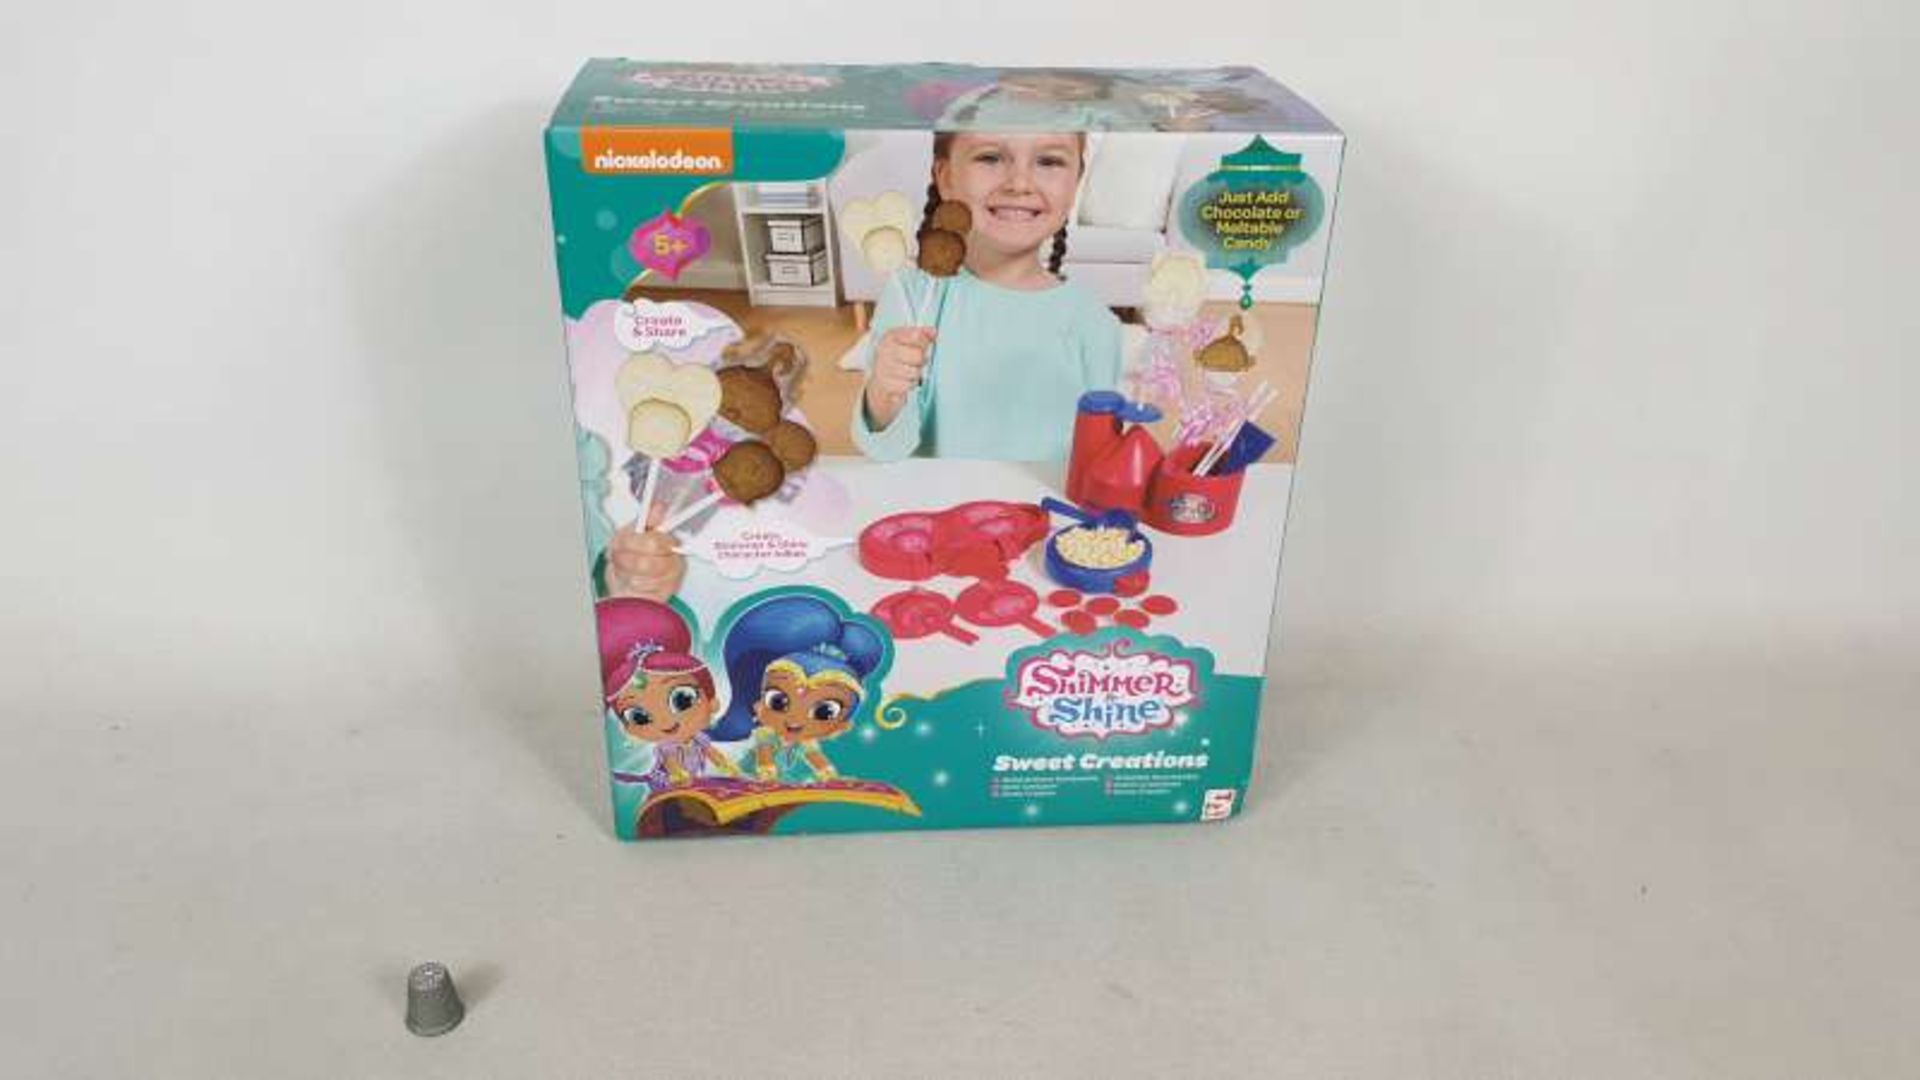 30 X BRAND NEW BOXED SHIMMER AND SHINE SWEET CREATIONS IN 5 BOXES